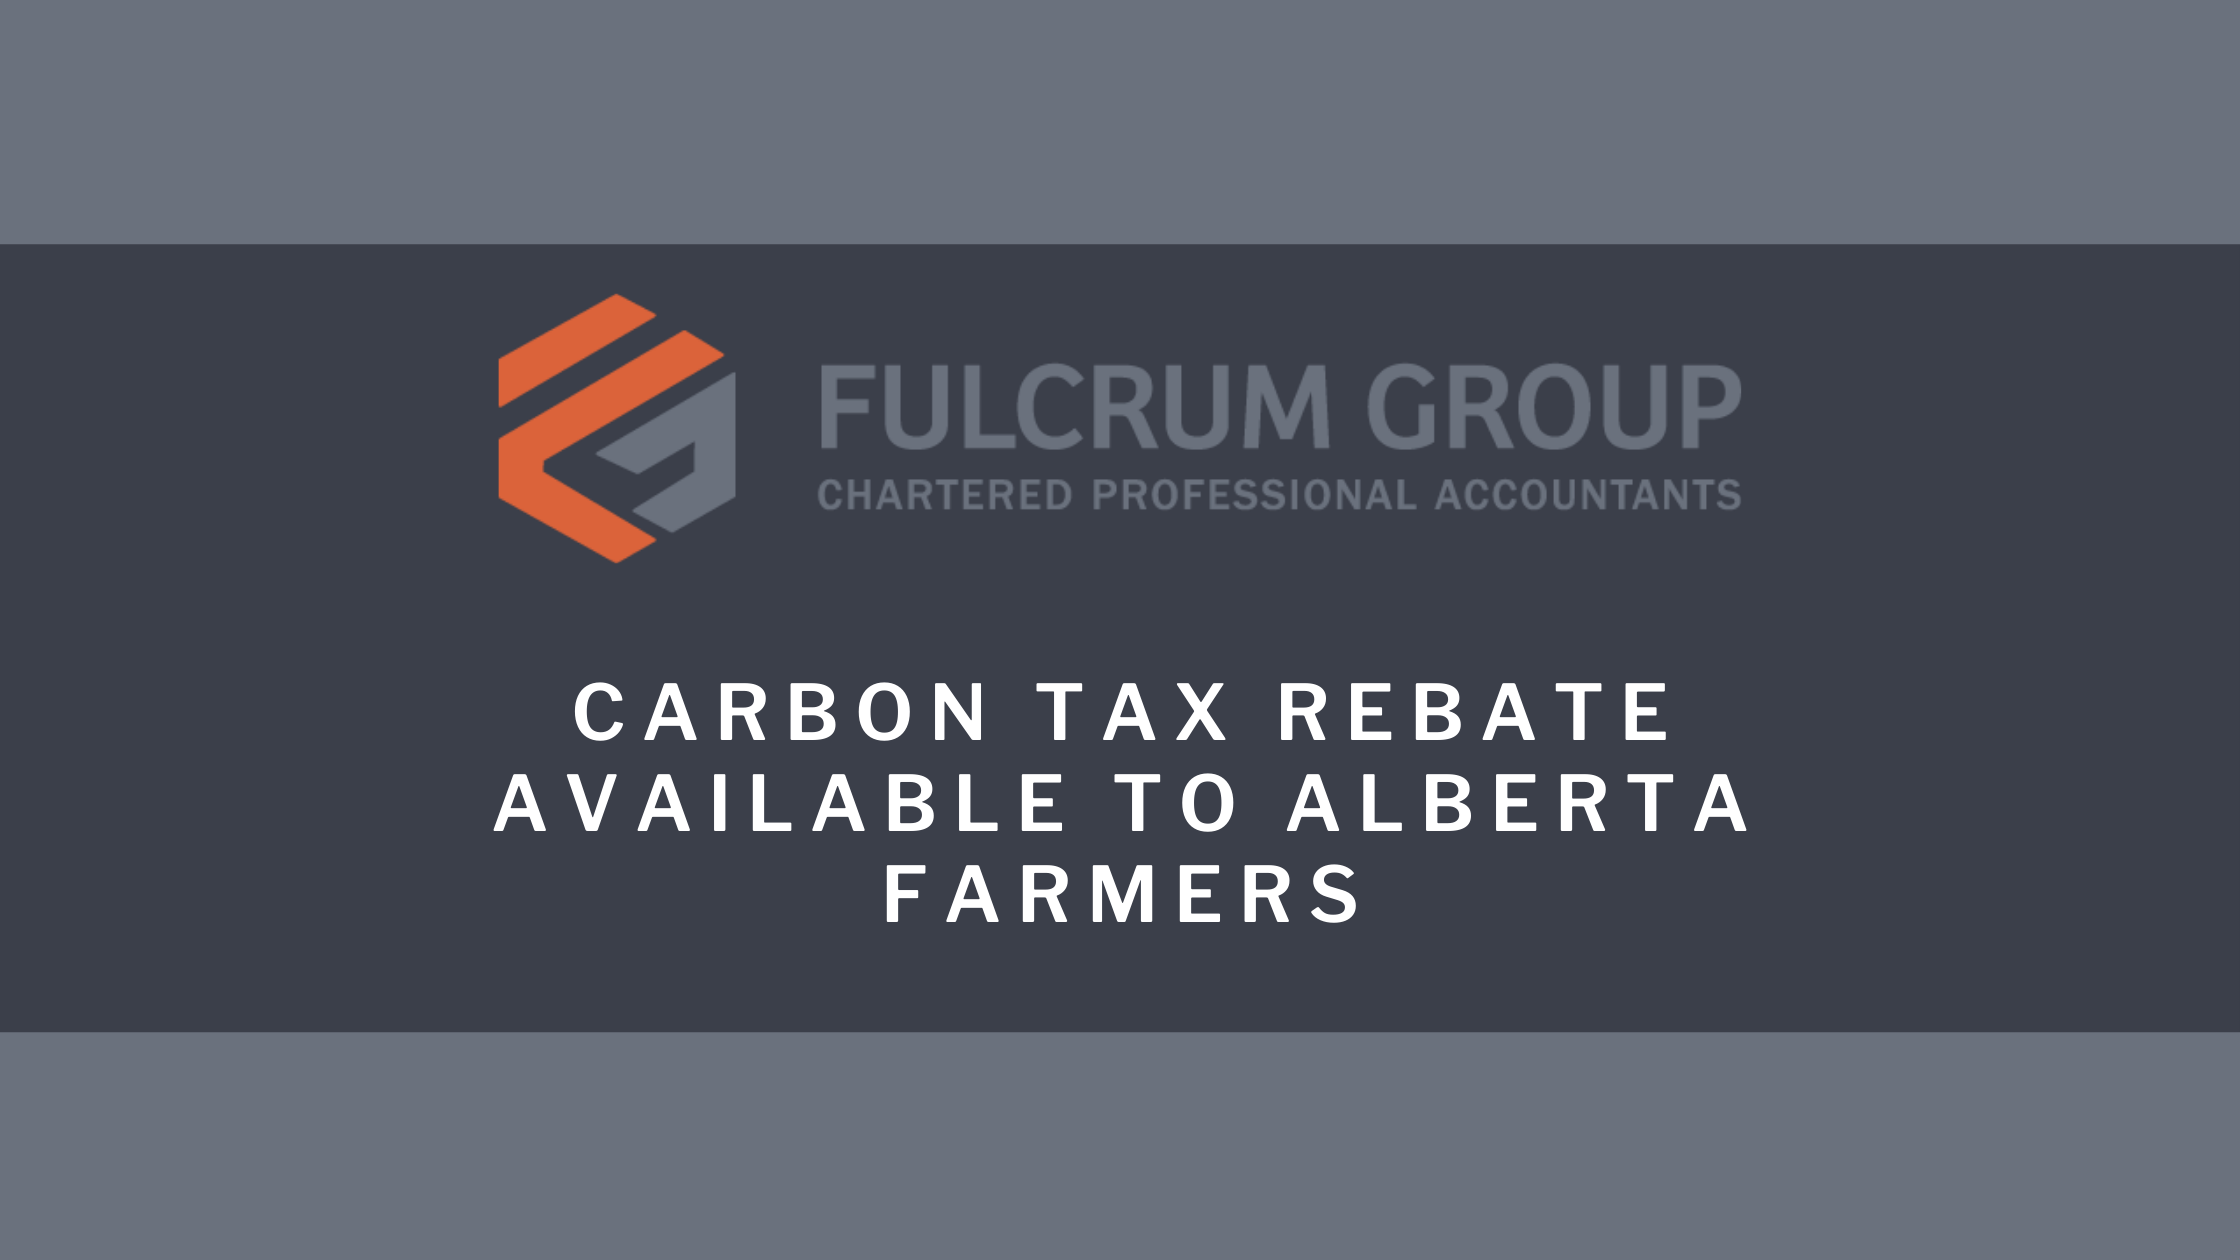 Is Carbon Tax Rebate Taxable